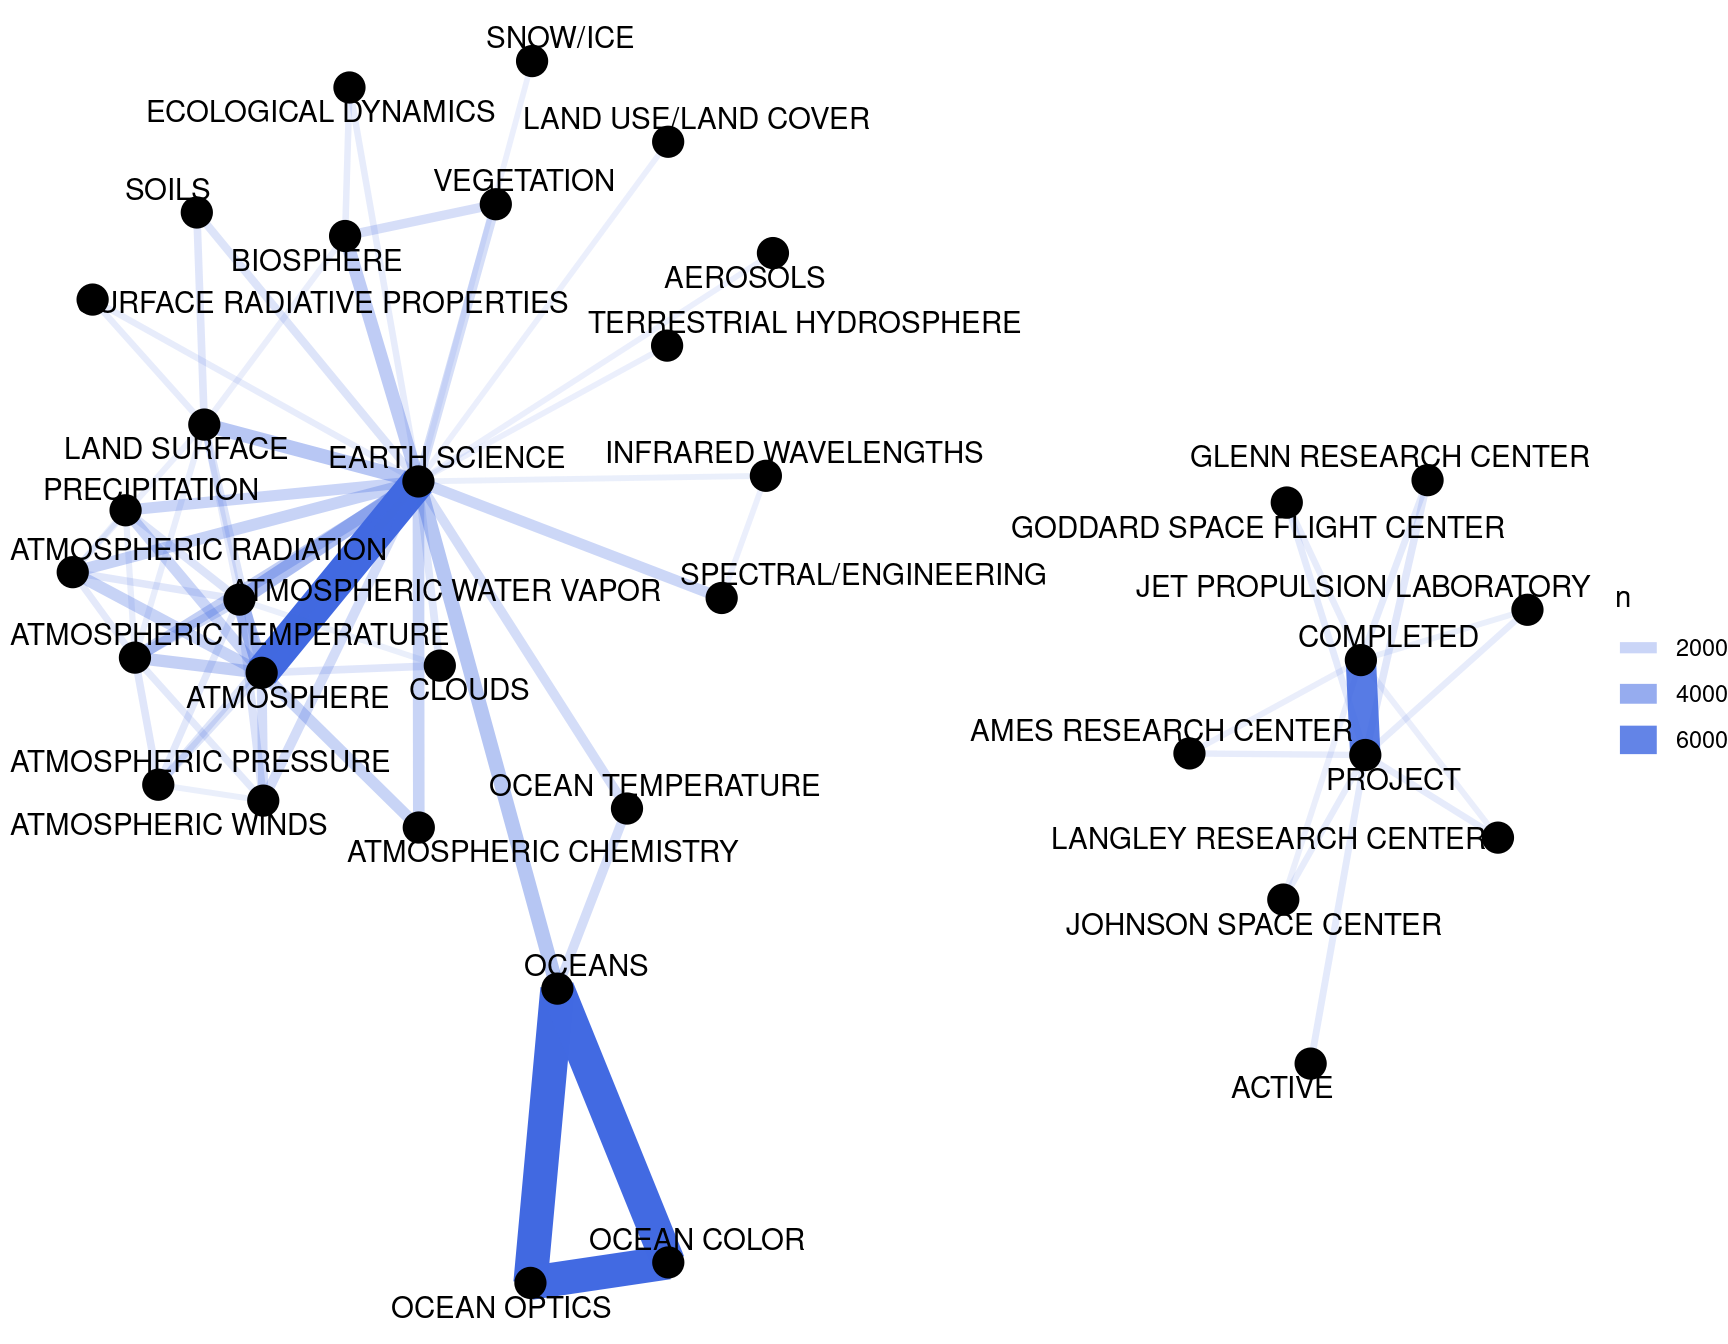 Co-occurrence network in NASA dataset keywords